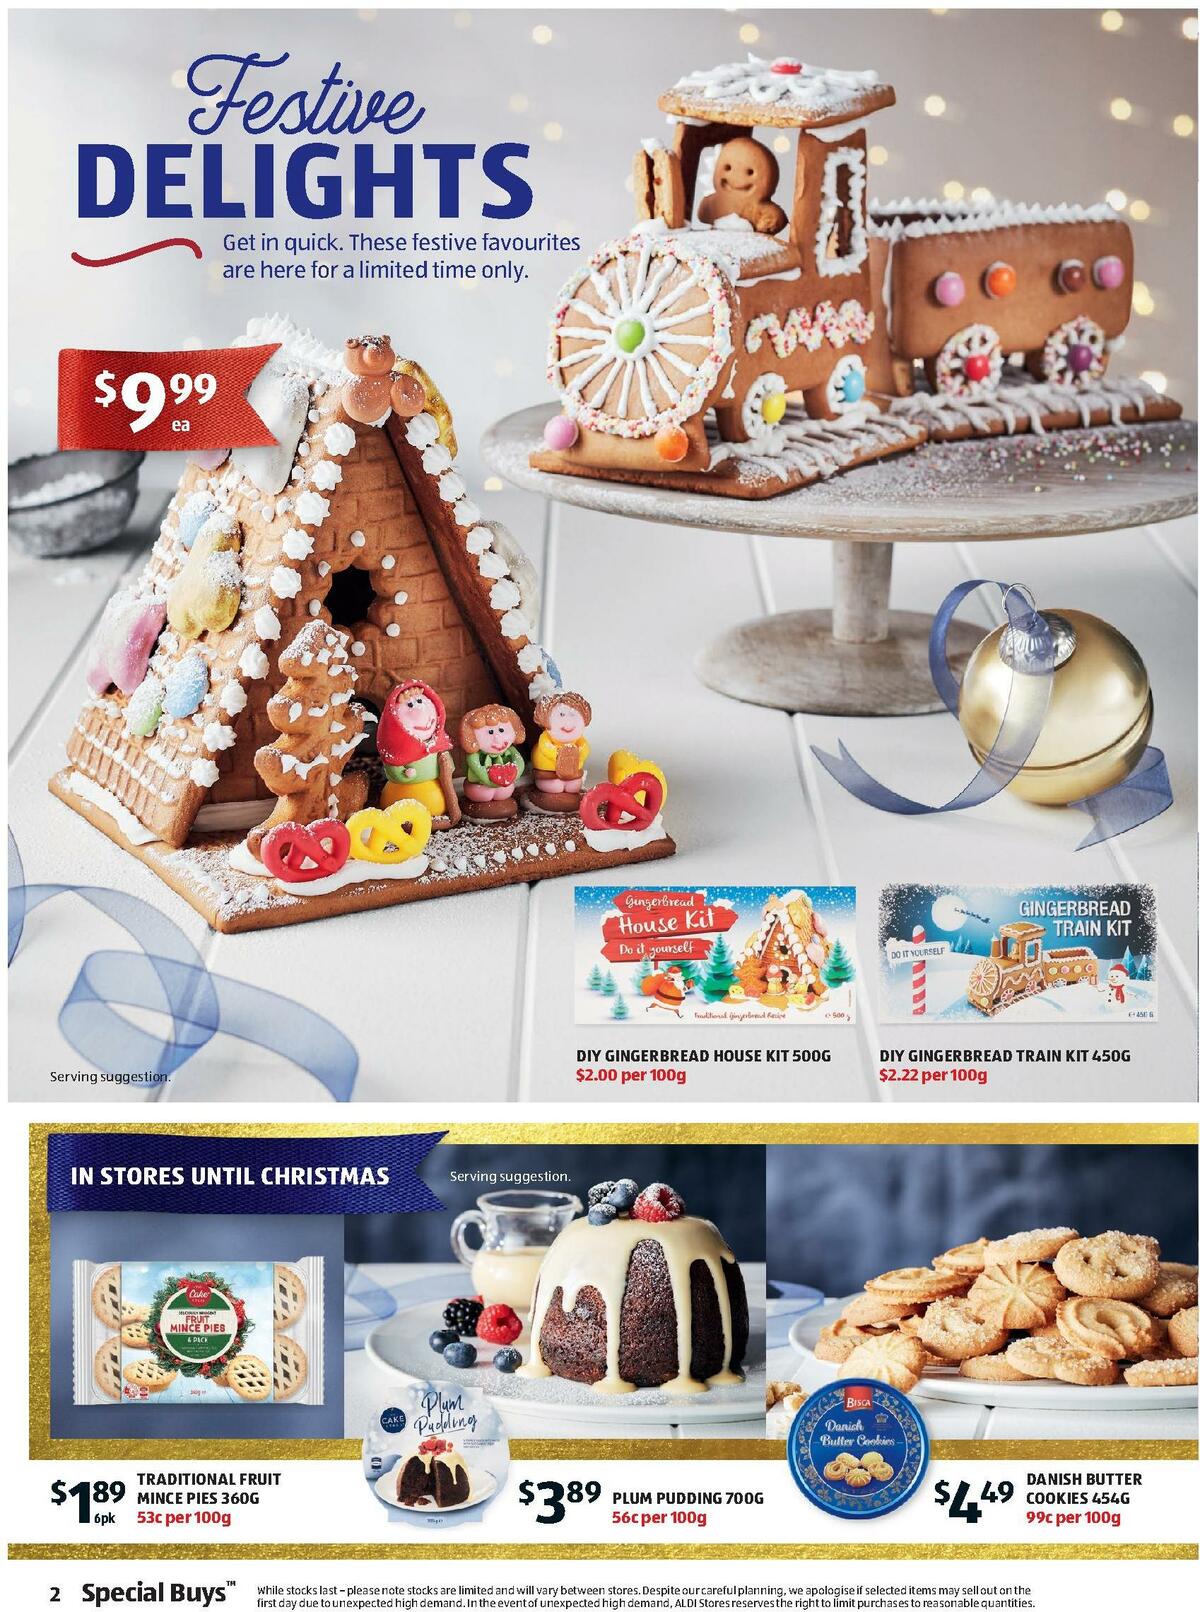 ALDI Catalogues from 7 October